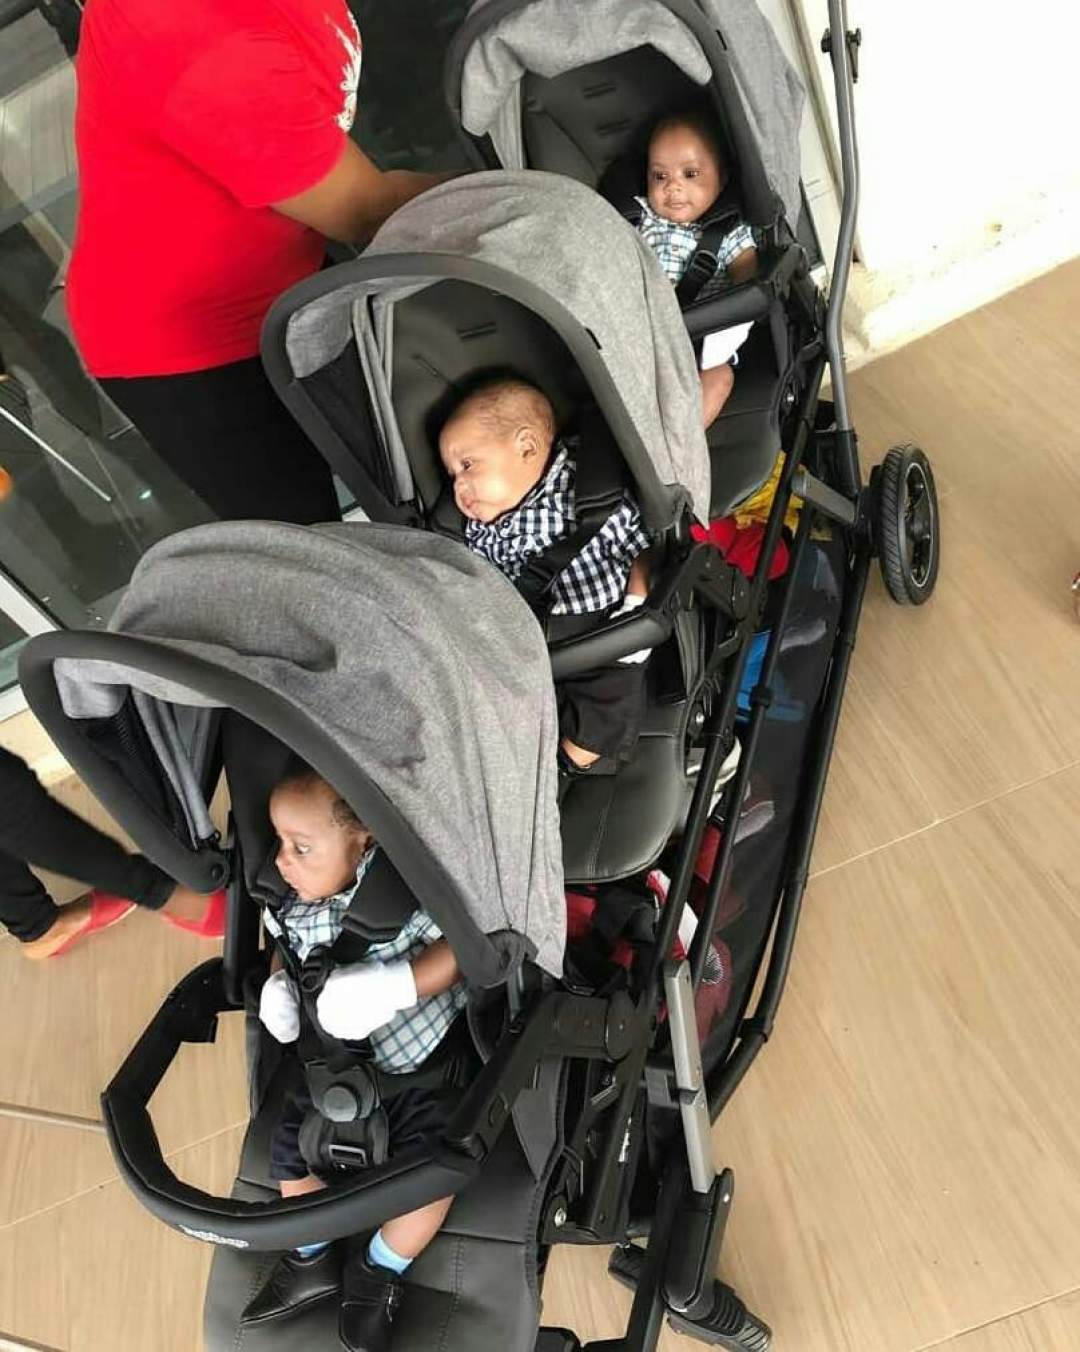 'God bless the day I found you' - FFK tells his wife Precious as he shares adorable photos of her with their sons